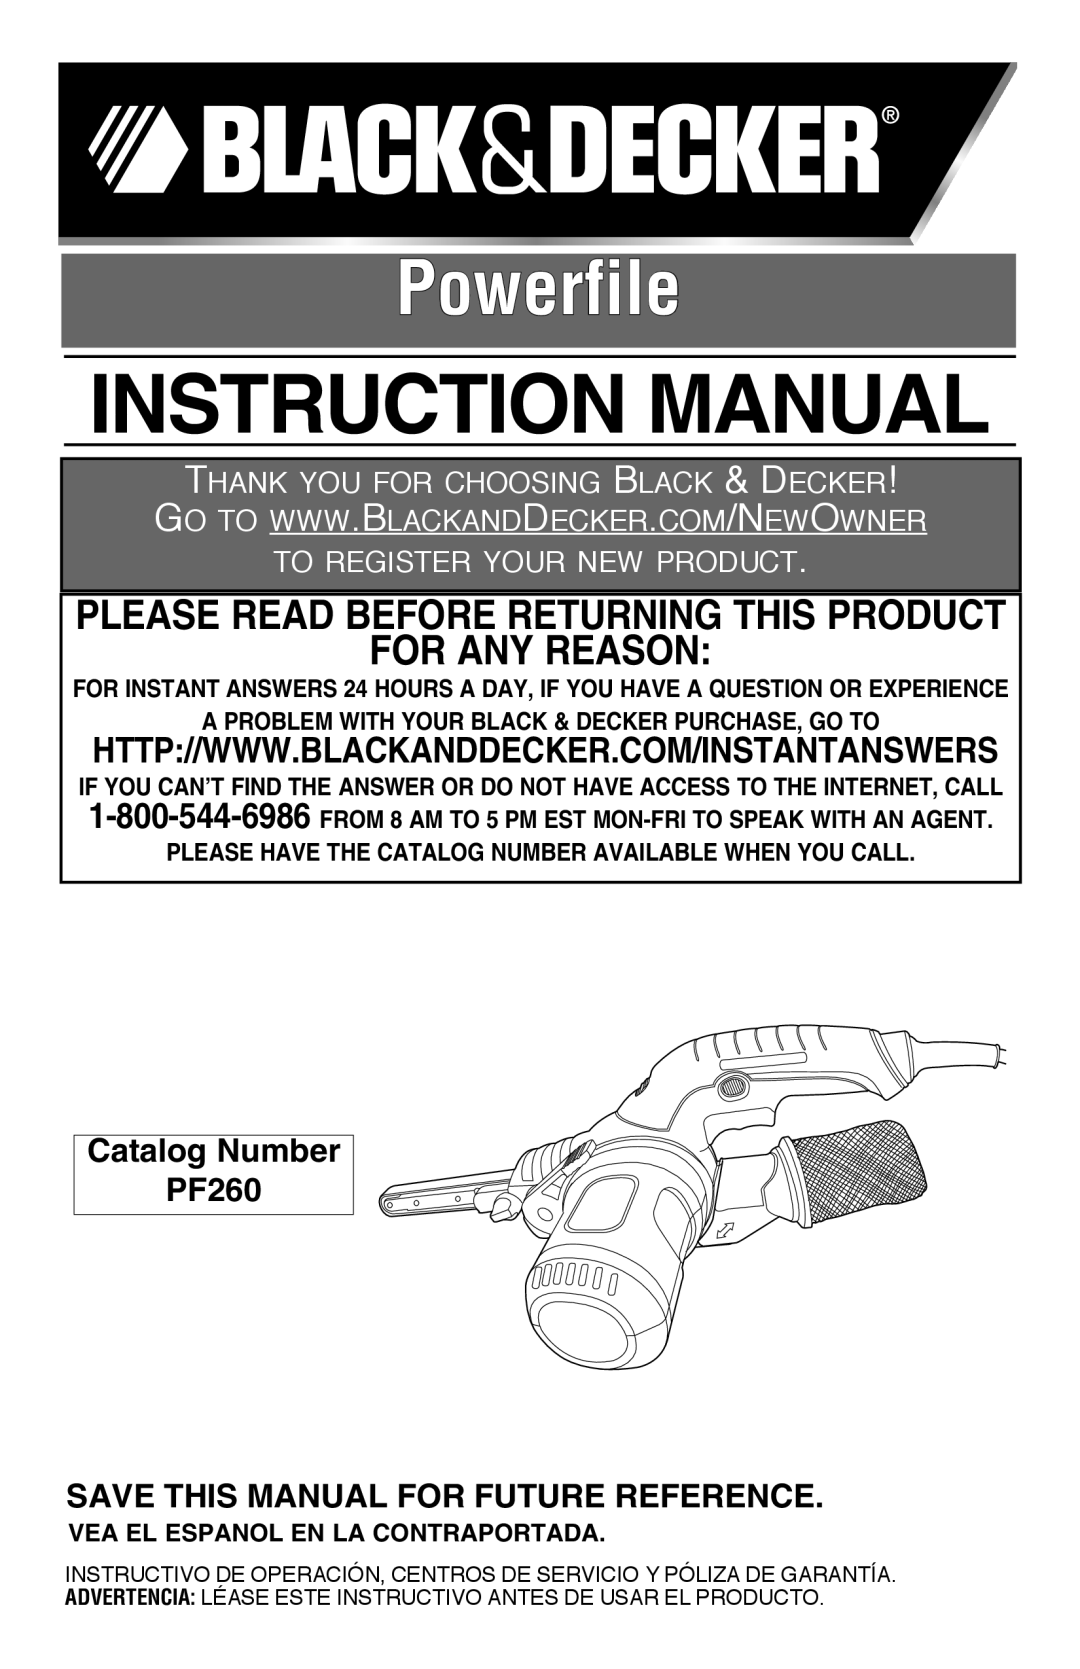 Black & Decker instruction manual Catalog Number PF260 Save this manual for Future reference, Powerfile 